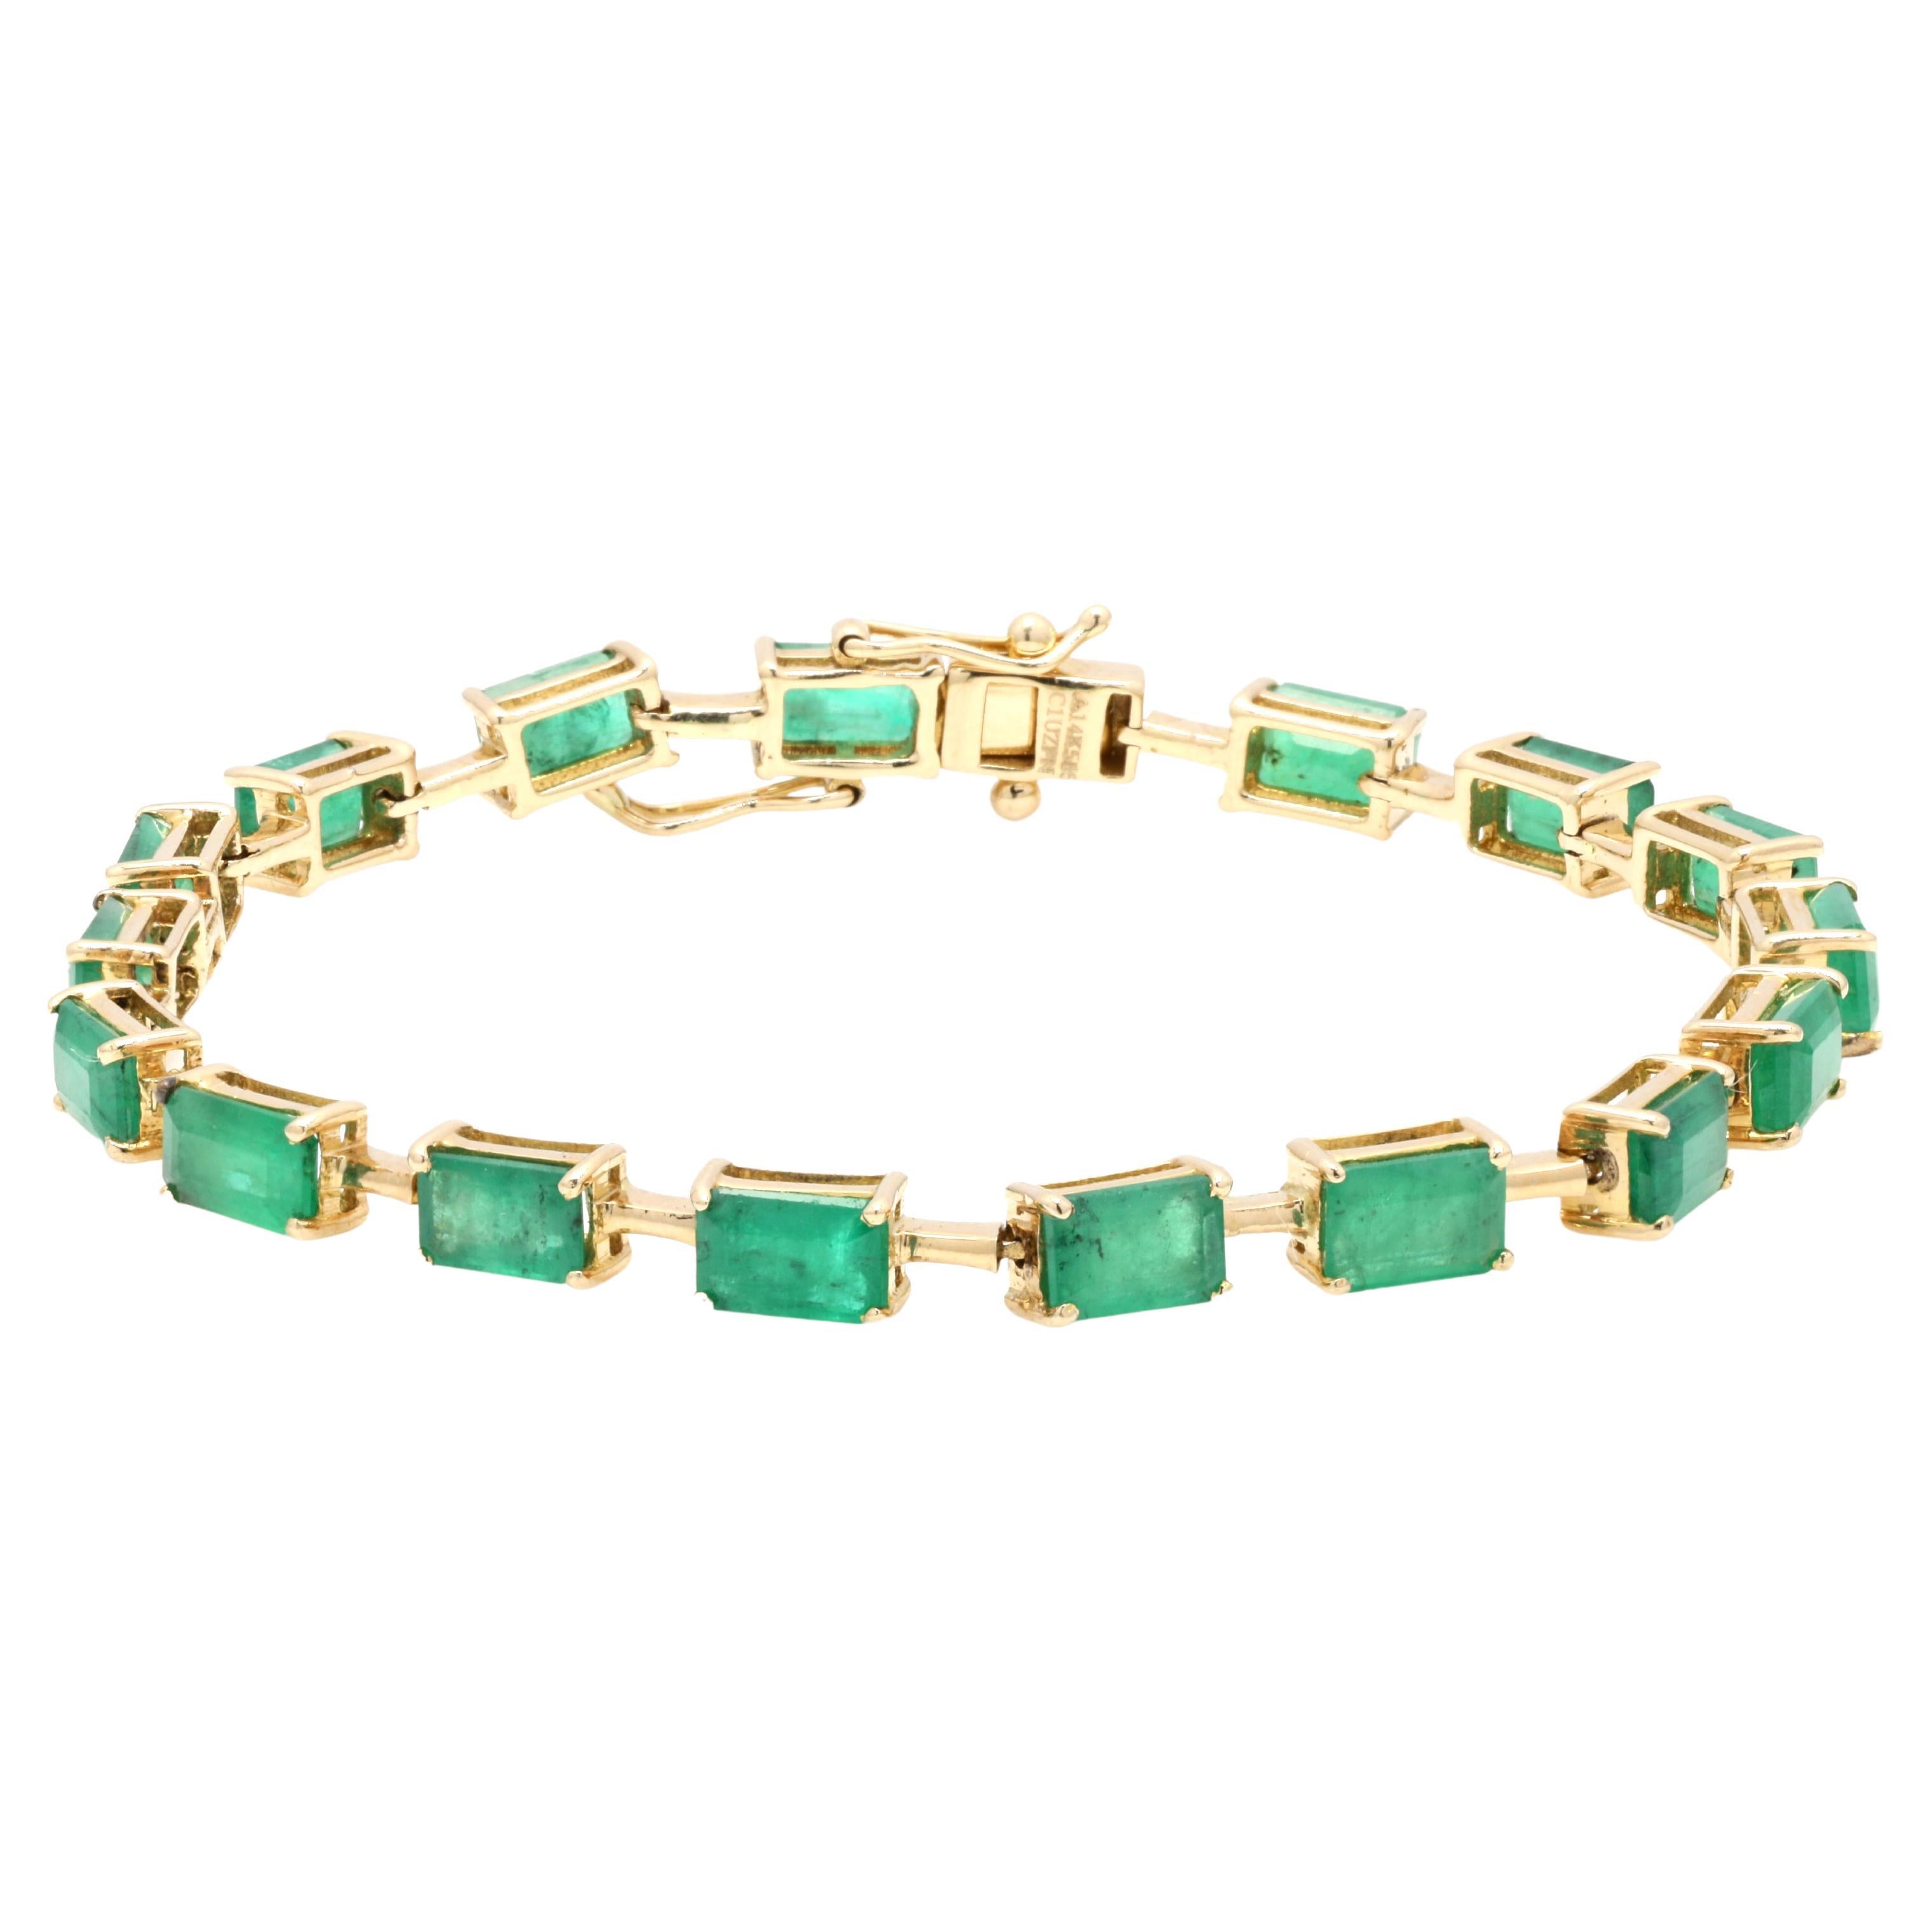 Magnificent Baguette 9 Ct Natural Emerald Tennis Bracelet in 14K Yellow Gold